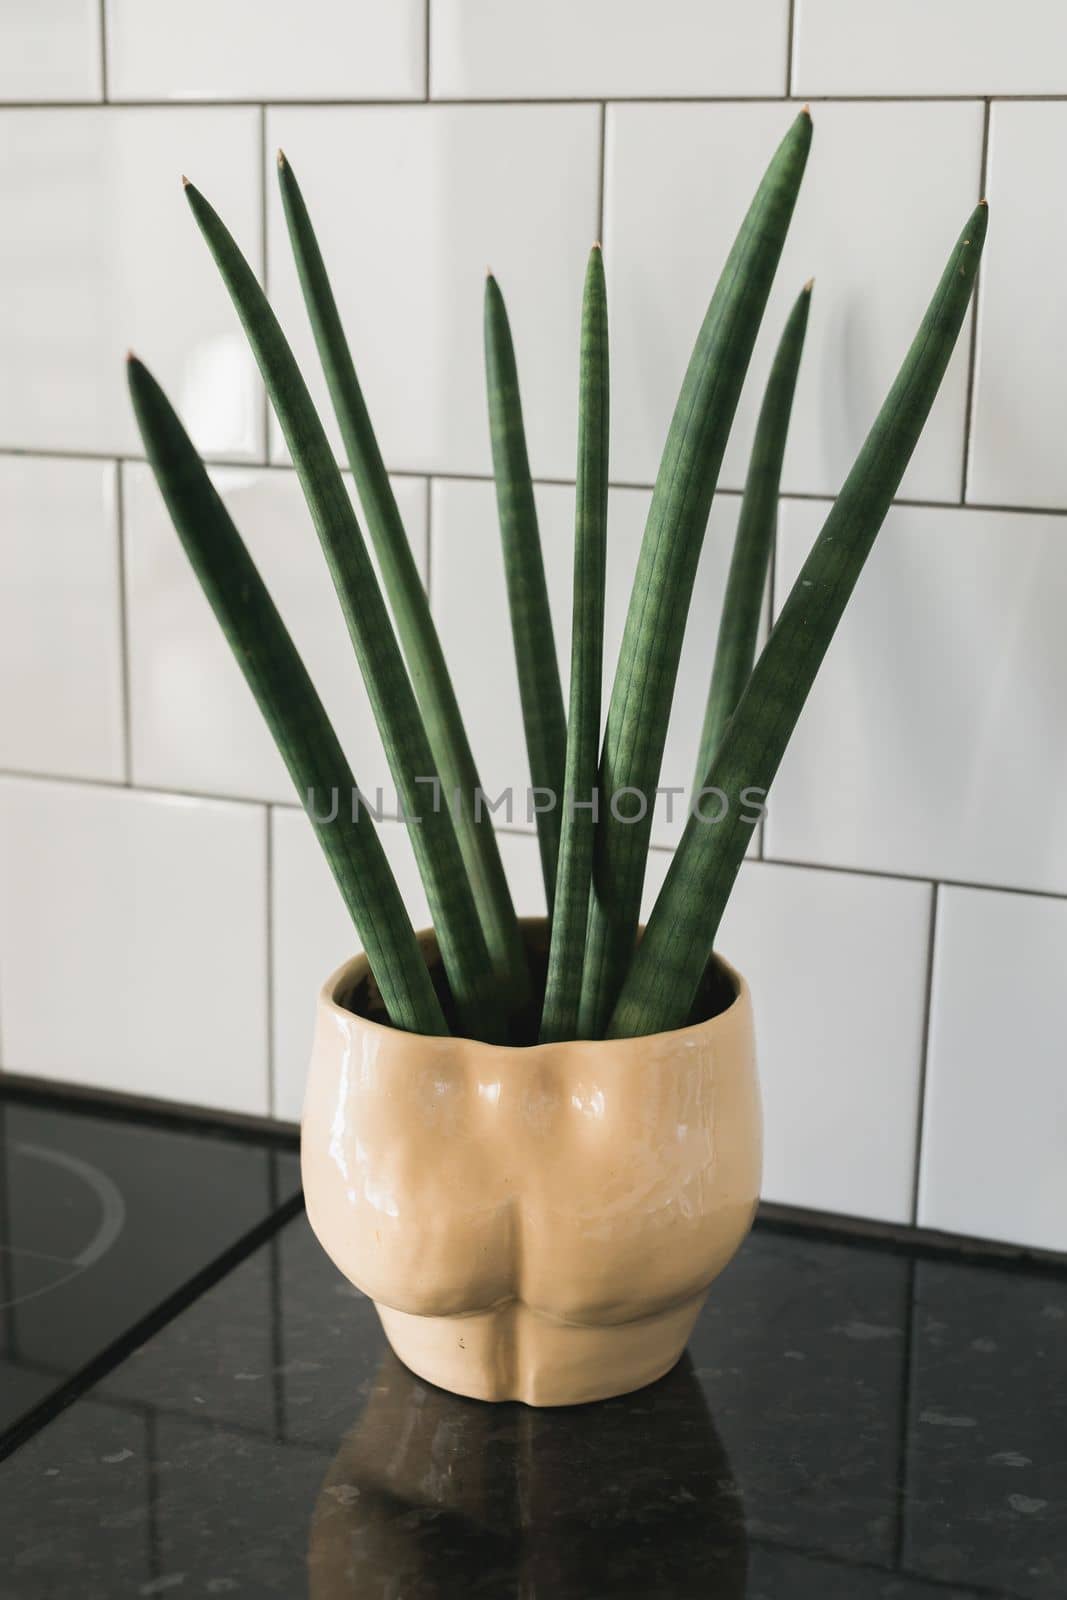 Medium pot with green leaves on wooden floor - home plant concept by Satura86